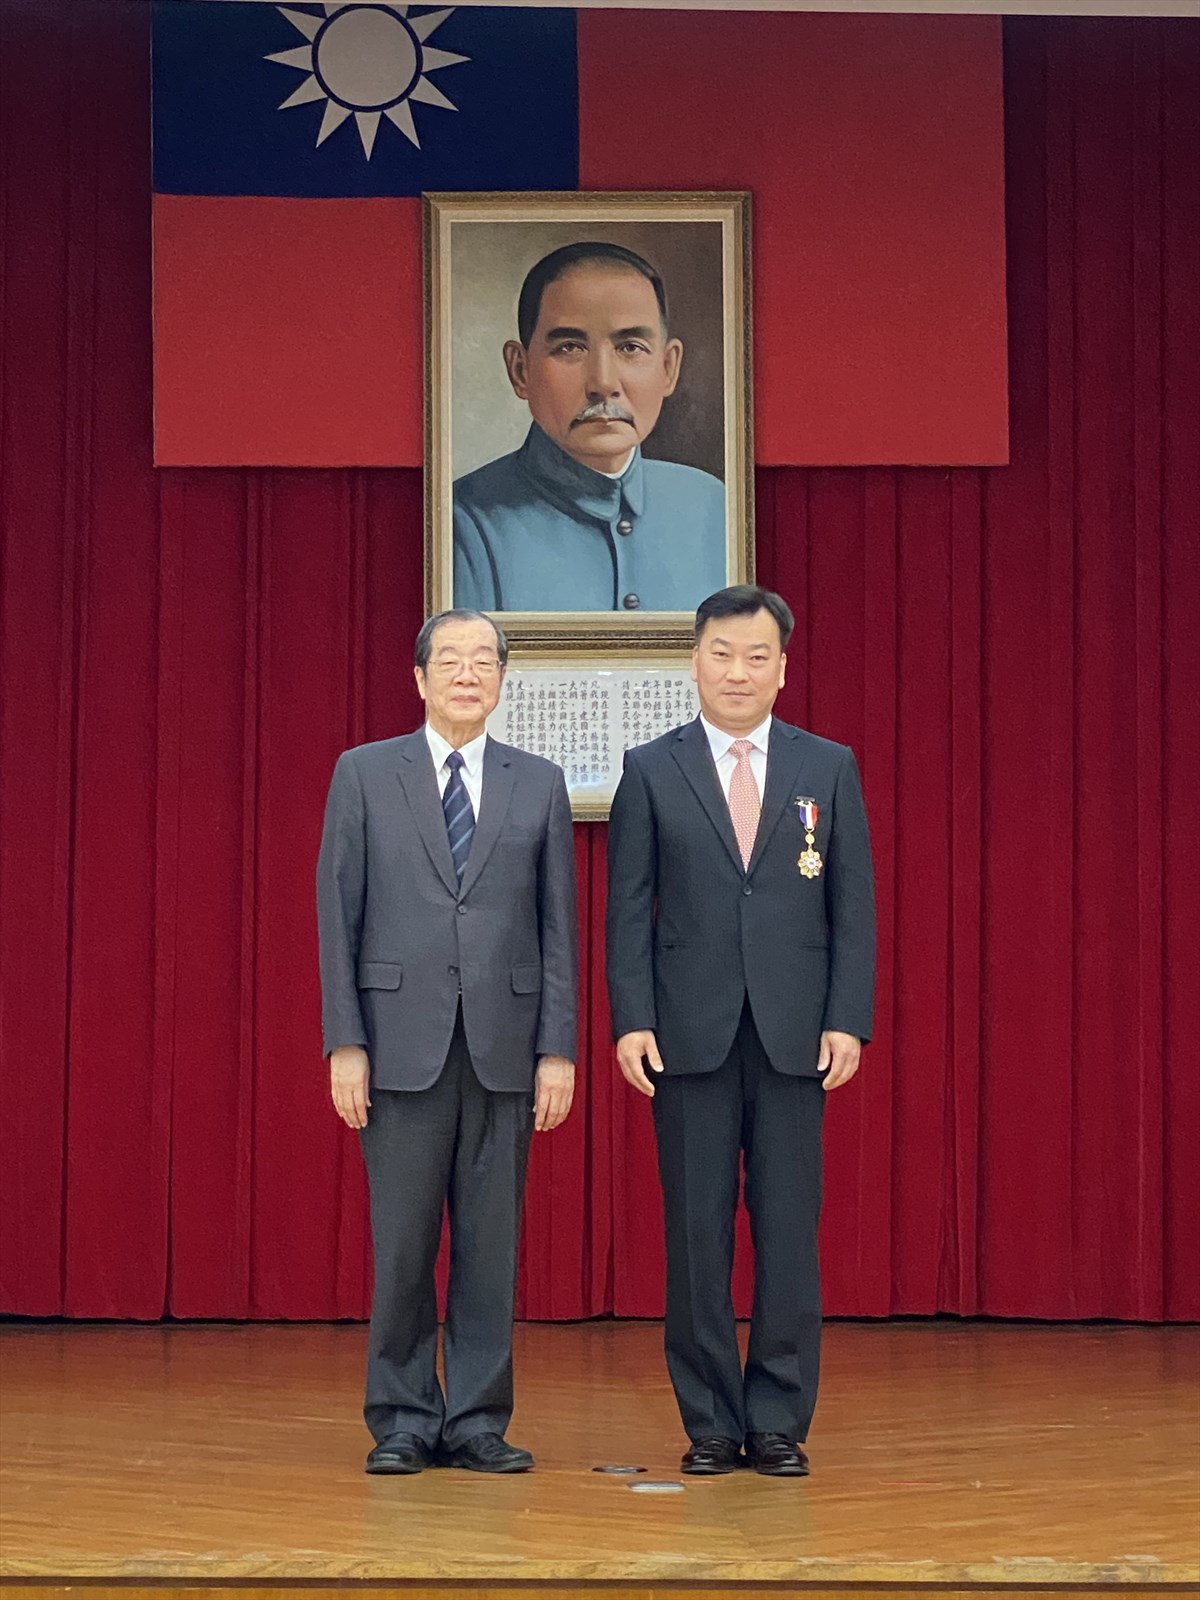 02.KSU Conducts National Examination Services for Over 10 Years: President Lee Tien-Shiang Awarded Third-Class Medal for Supervisory Dedication